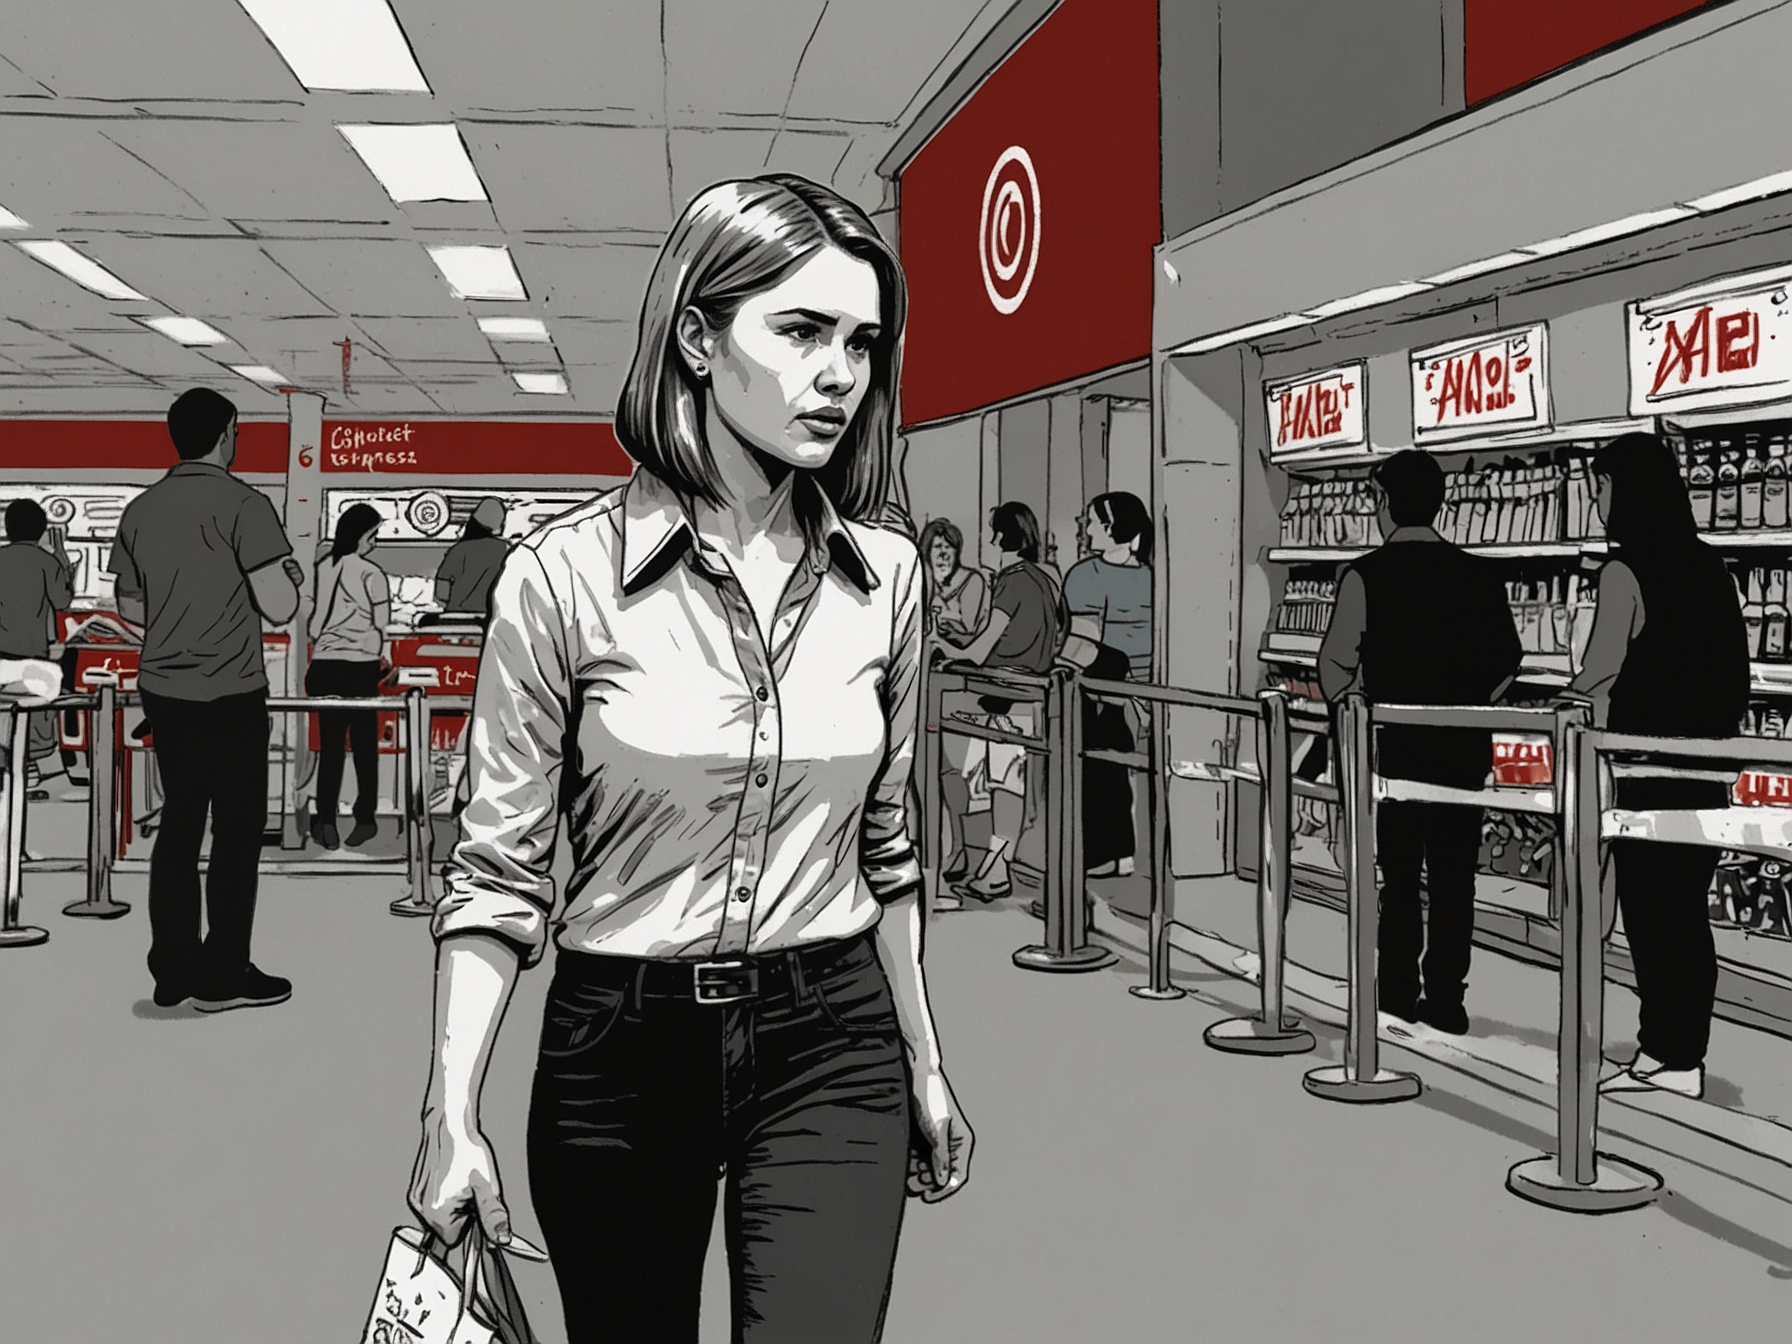 A frustrated shopper standing in a long express lane queue at Target, clearly showing the express lane signage and the discontent on her face.